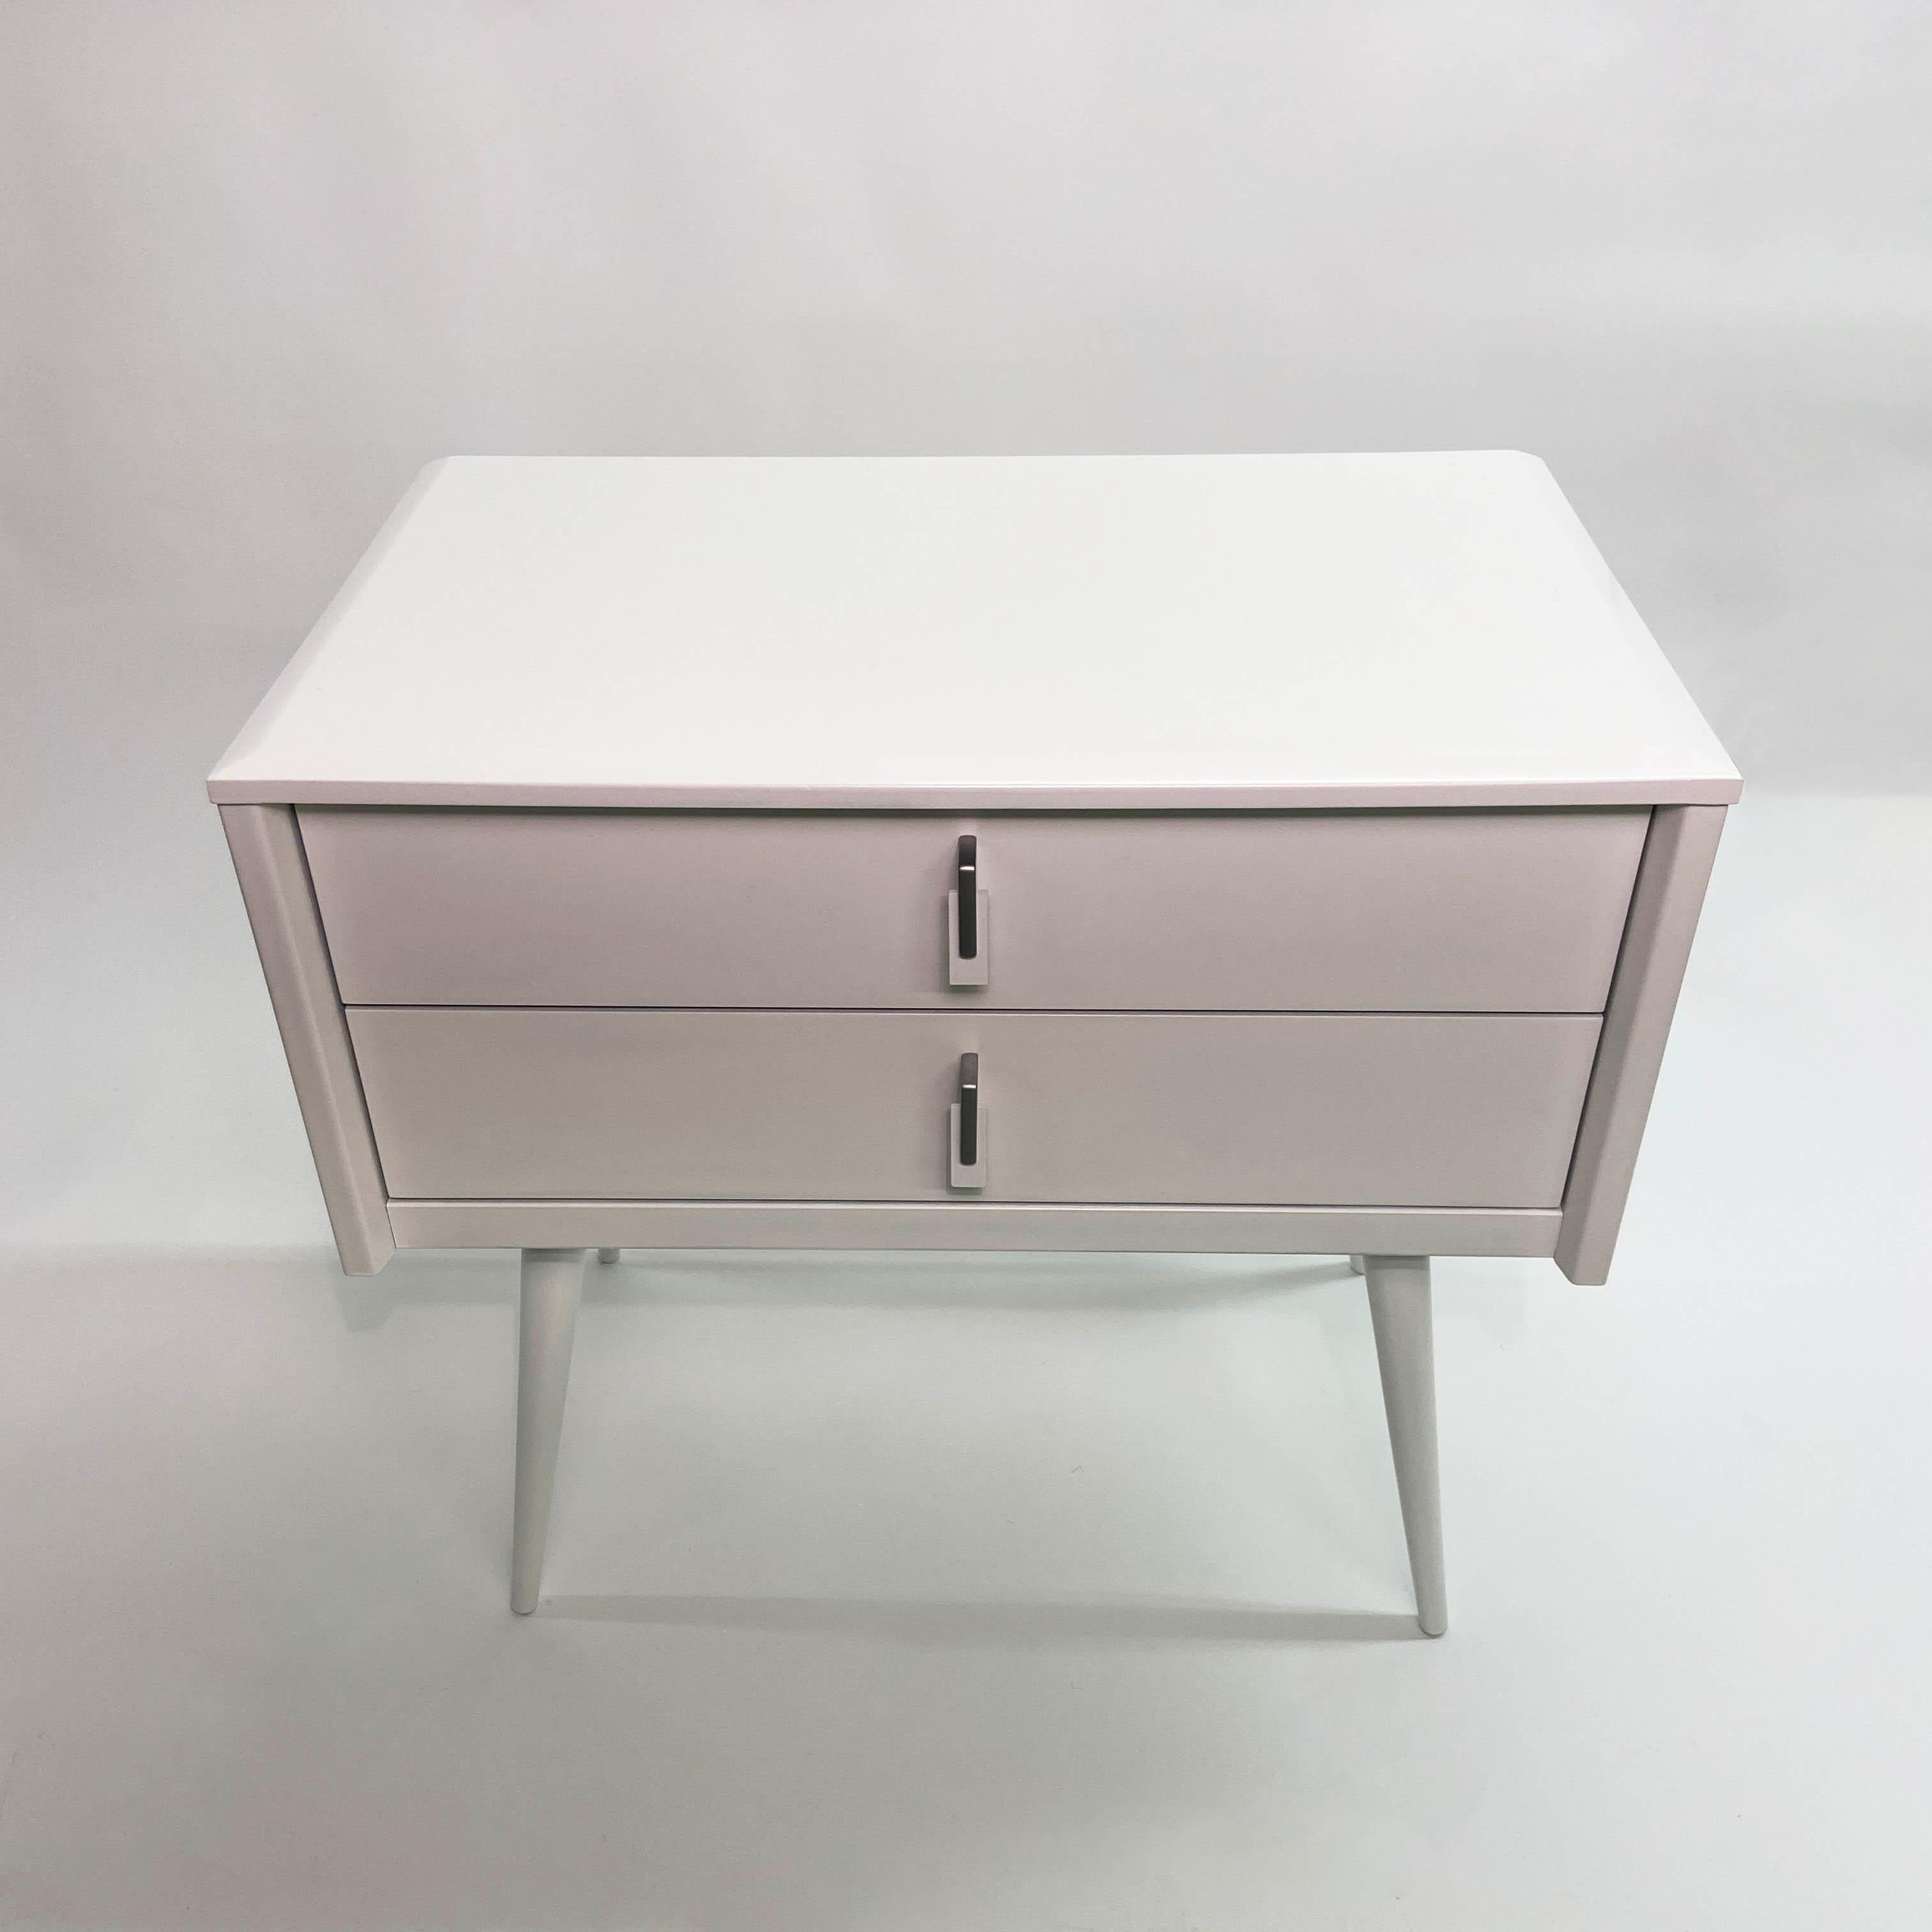 Offering a sleek and stylish French Mid-Century Modern double drawer nightstand or end table. It has been newly refinished in Dove White lacquer. This vintage piece is made in France by Gautier and edited by Montage using original Paul McCobb legs